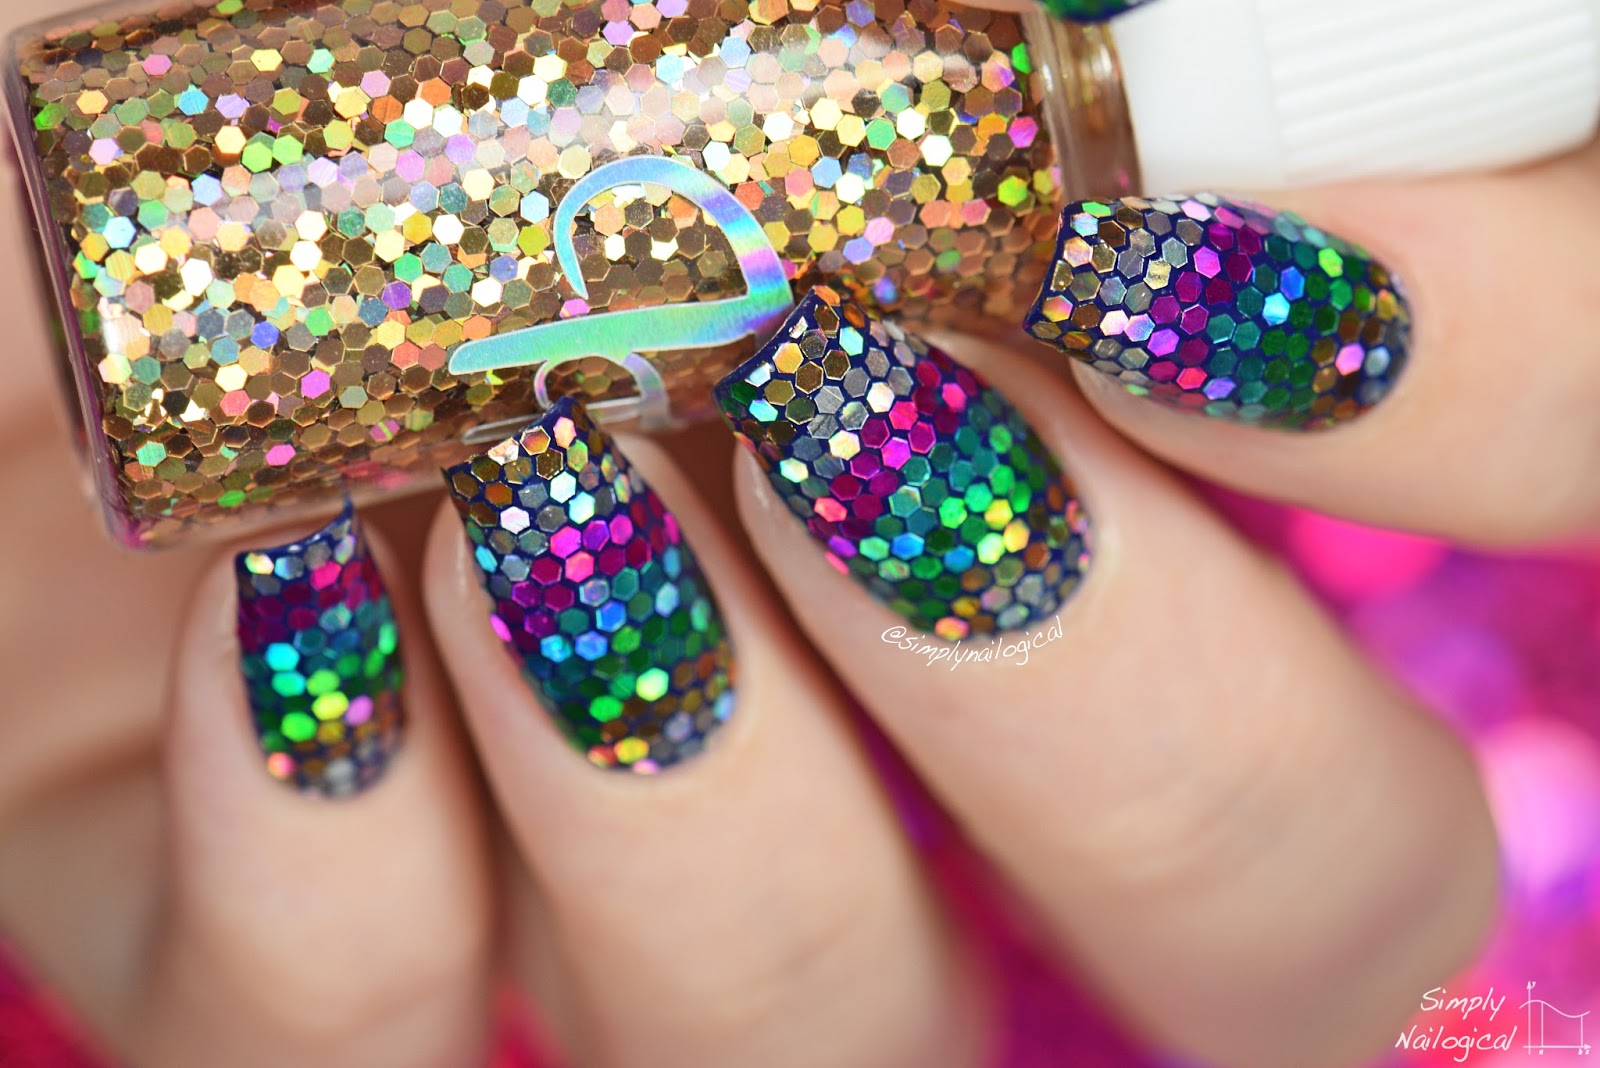 2. Simply Nailogical's Favorite Gradient Nail Art Designs - wide 4